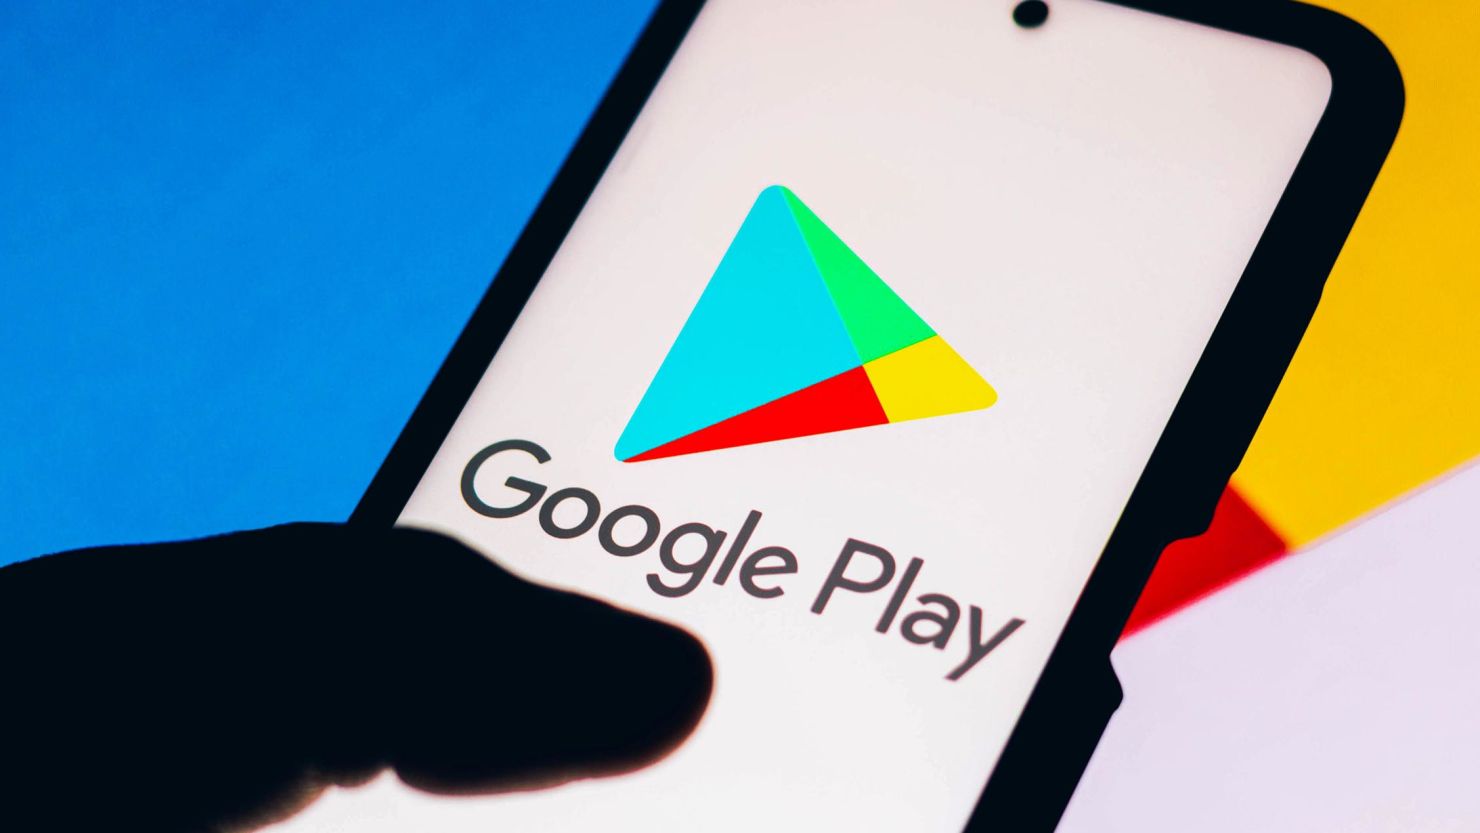 Google Play introduces new feature to identify official government apps